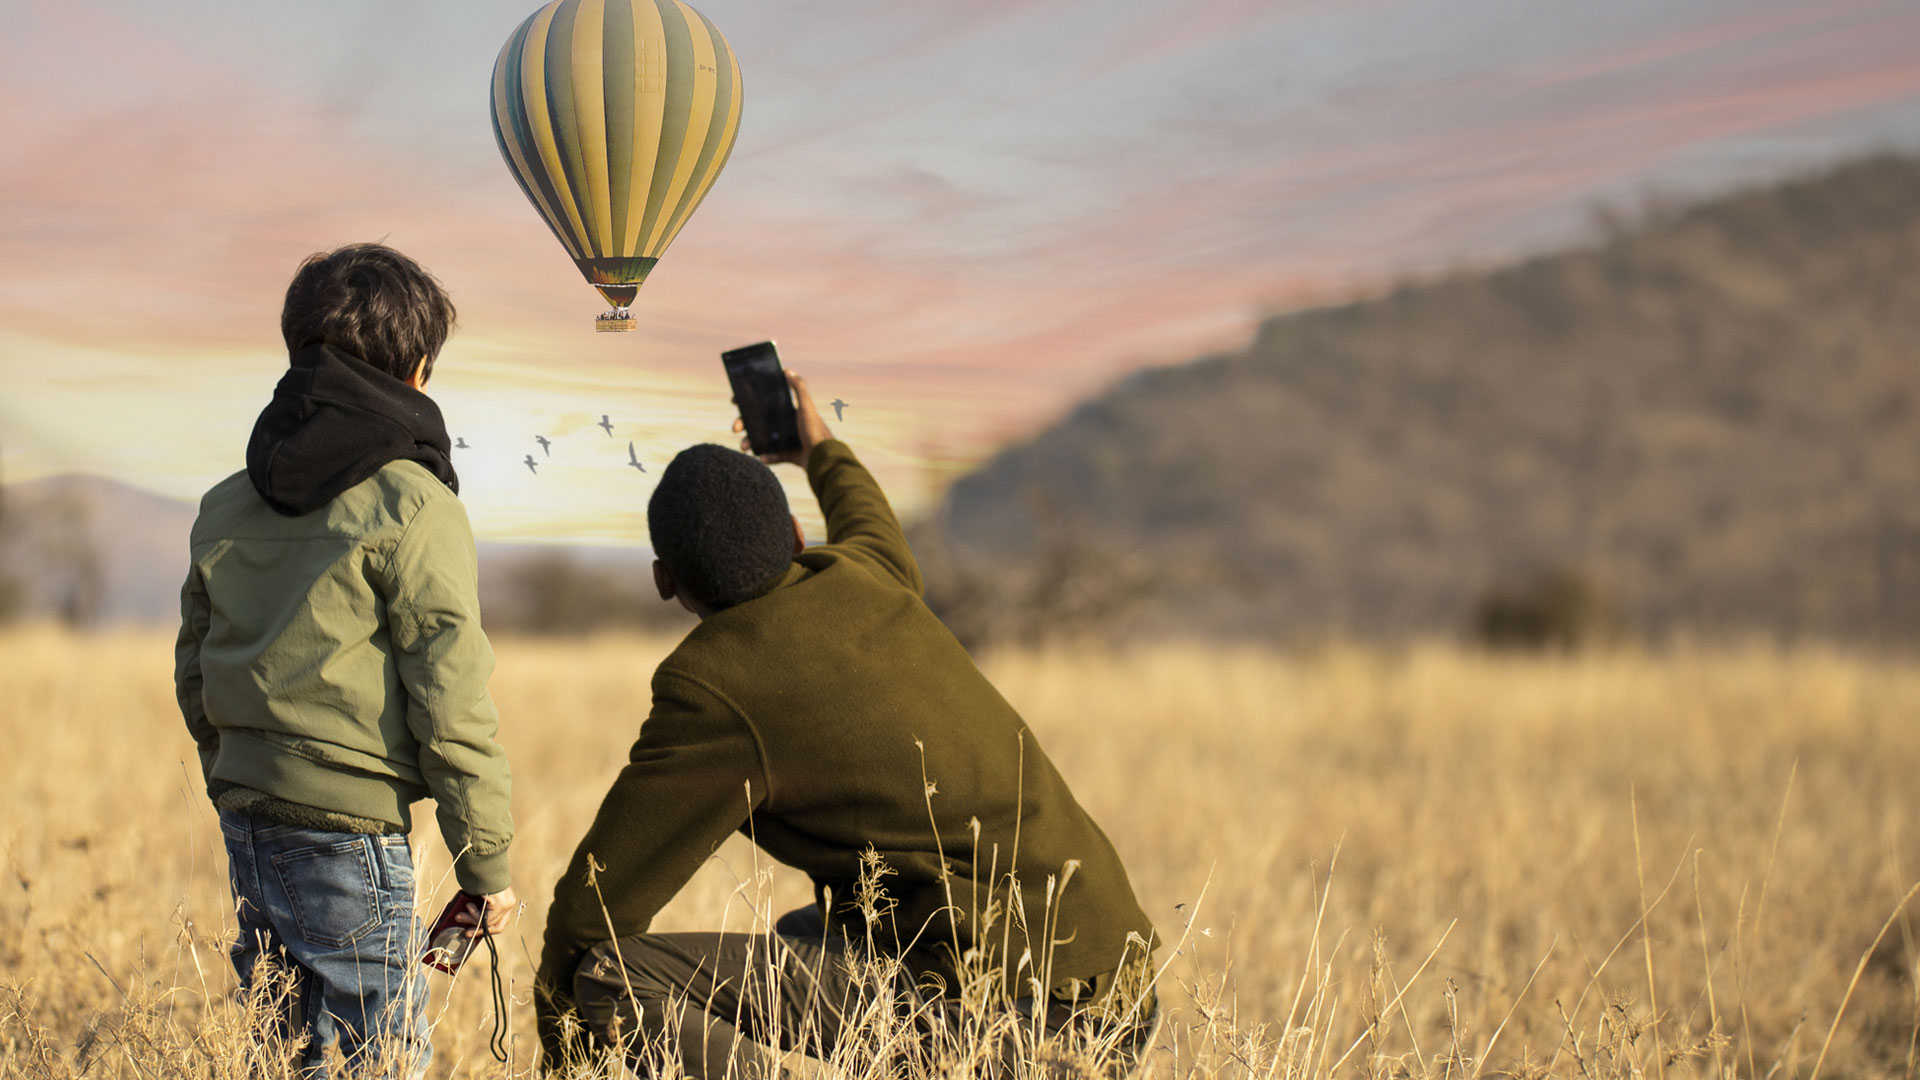 Safari for Family. Father and Son enjoying the view of Hot air Balloon in Serengeti